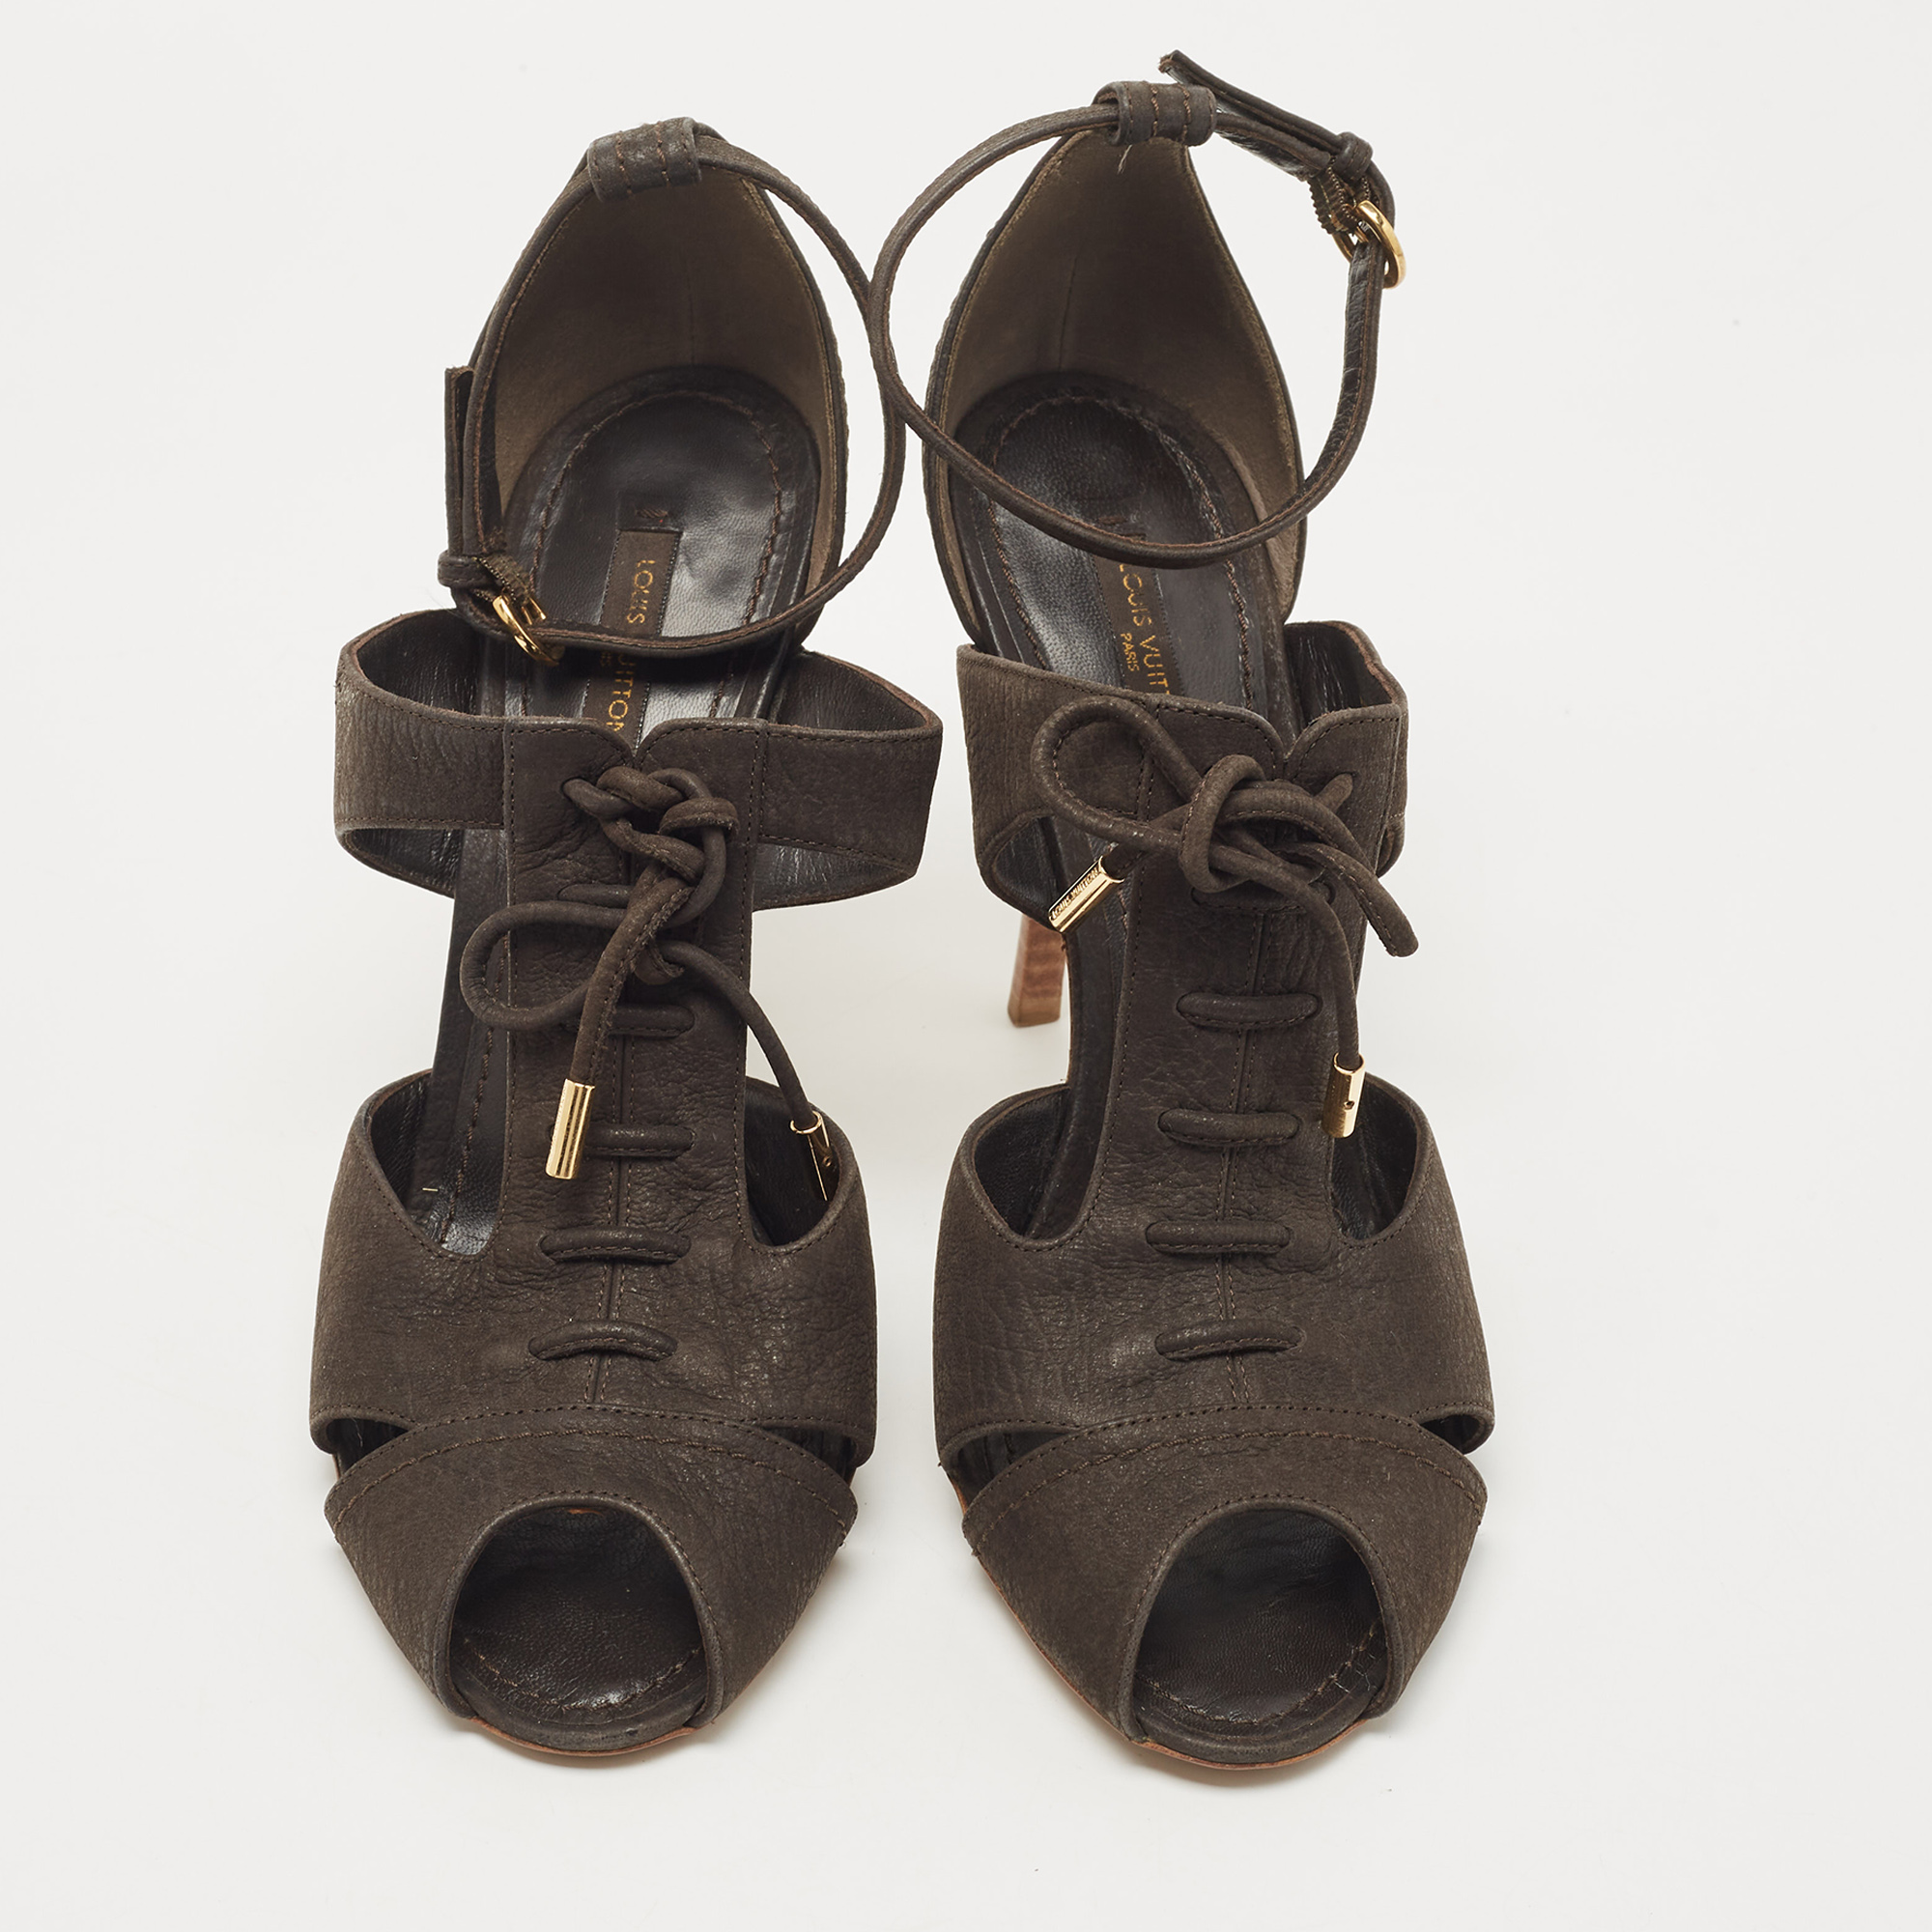 Louis Vuitton Dark Brown Pebbled Leather Corfu Caged Ankle Strap Sandals Size 40